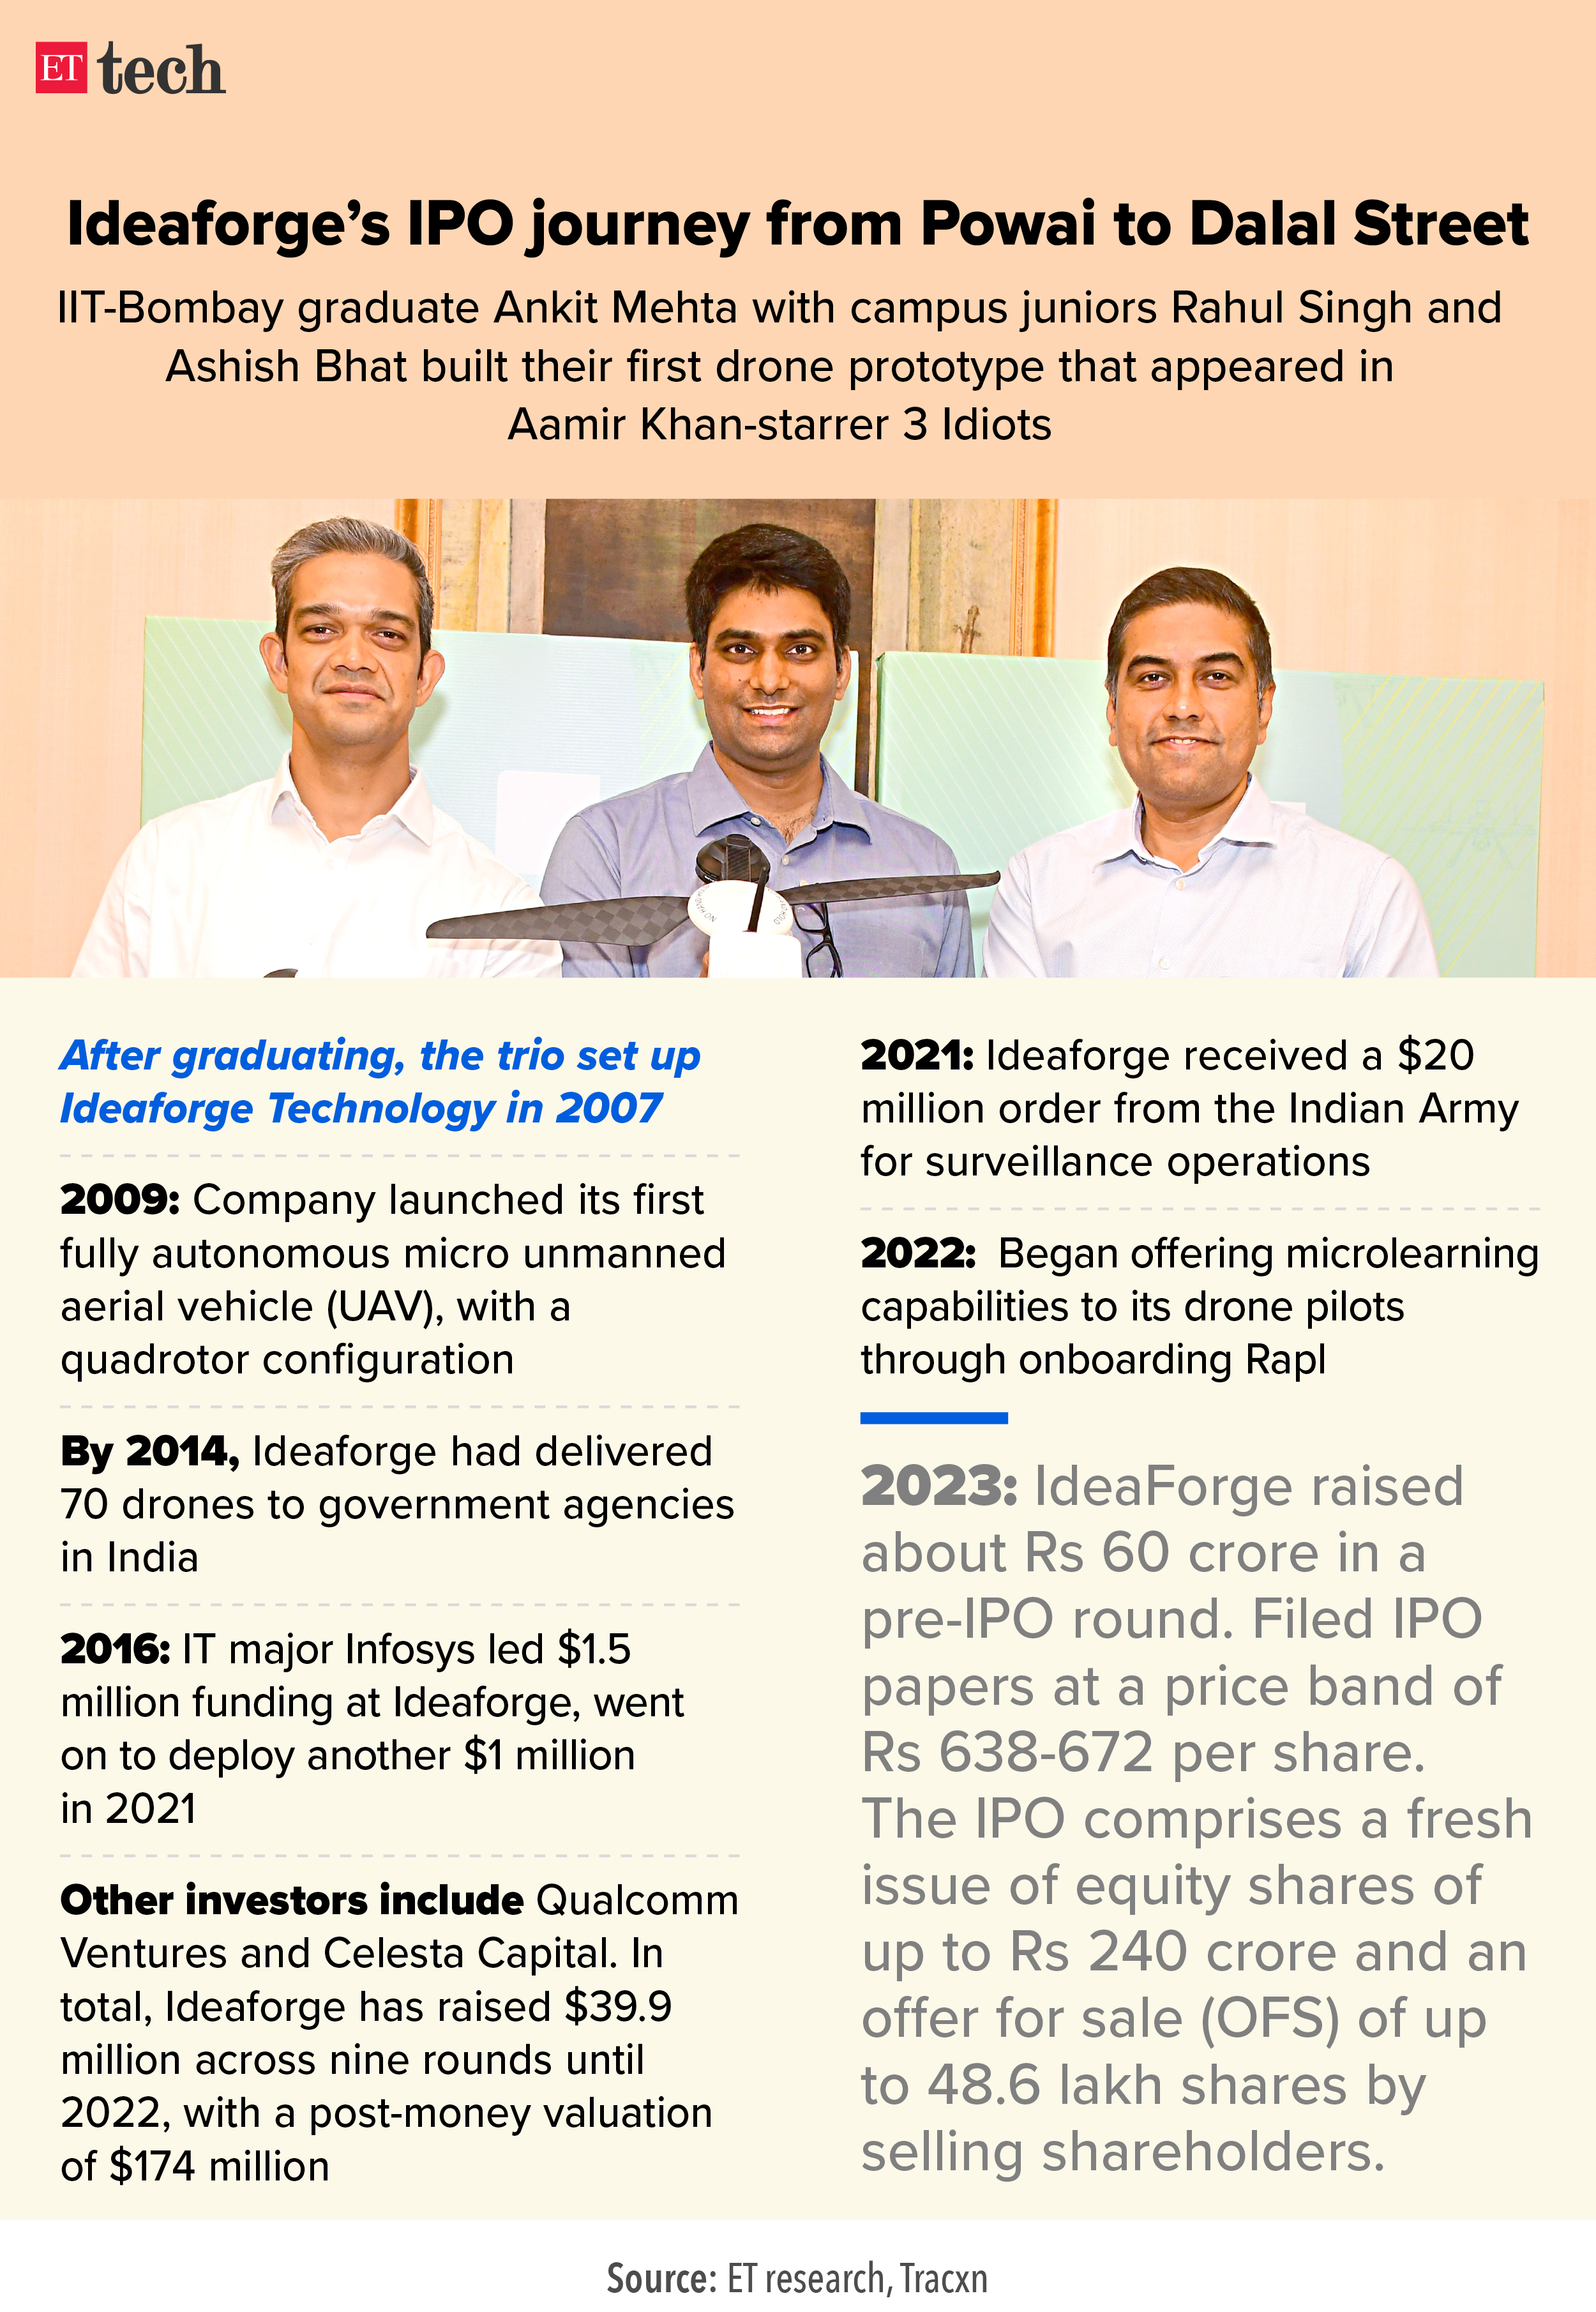 Ideaforges IPO journey from Powai to Dalal Street